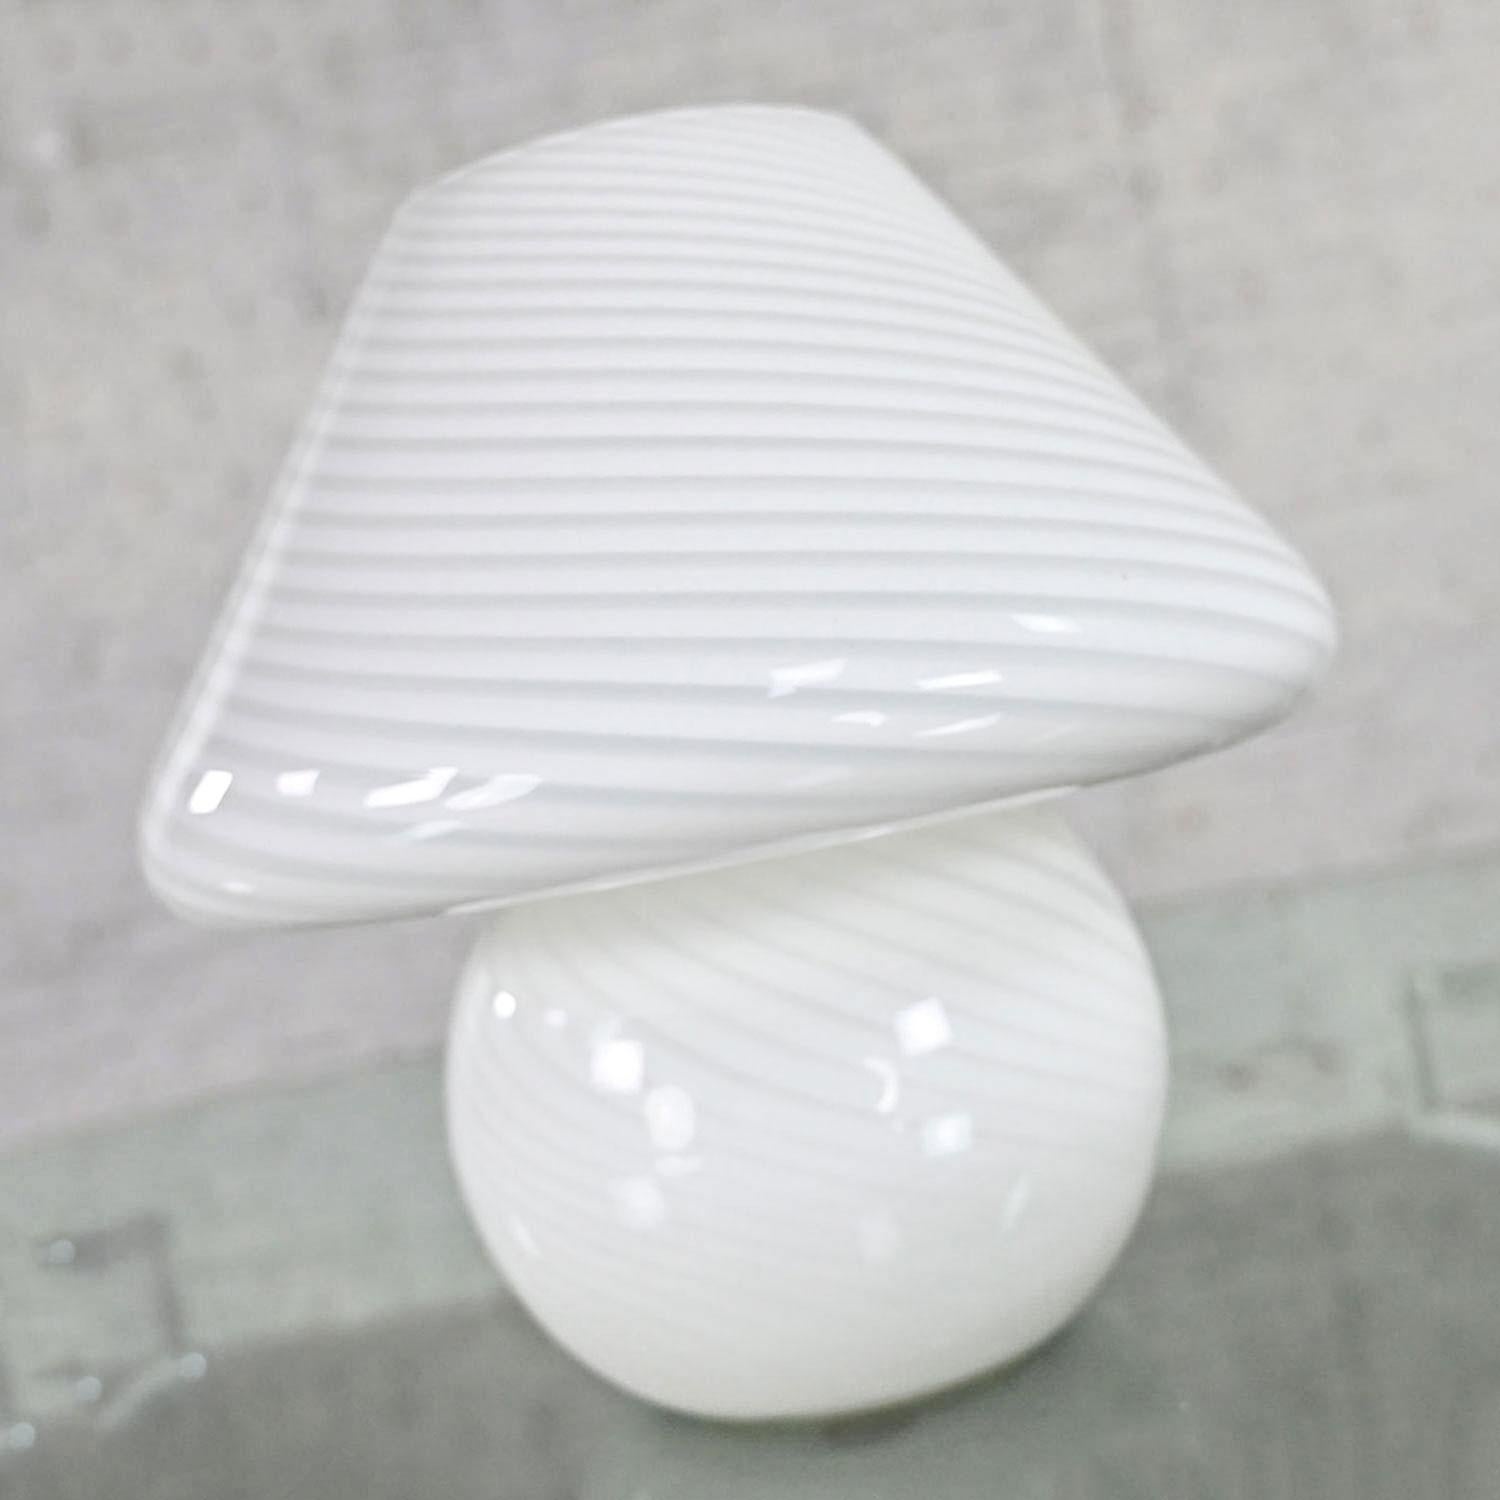 Gorgeous vintage Mid-Century Modern Italian Murano blown glass 1 piece base & shade white and clear swirled mushroom table lamp. Beautiful condition, keeping in mind that this is vintage and not new so will have signs of use and wear. We have